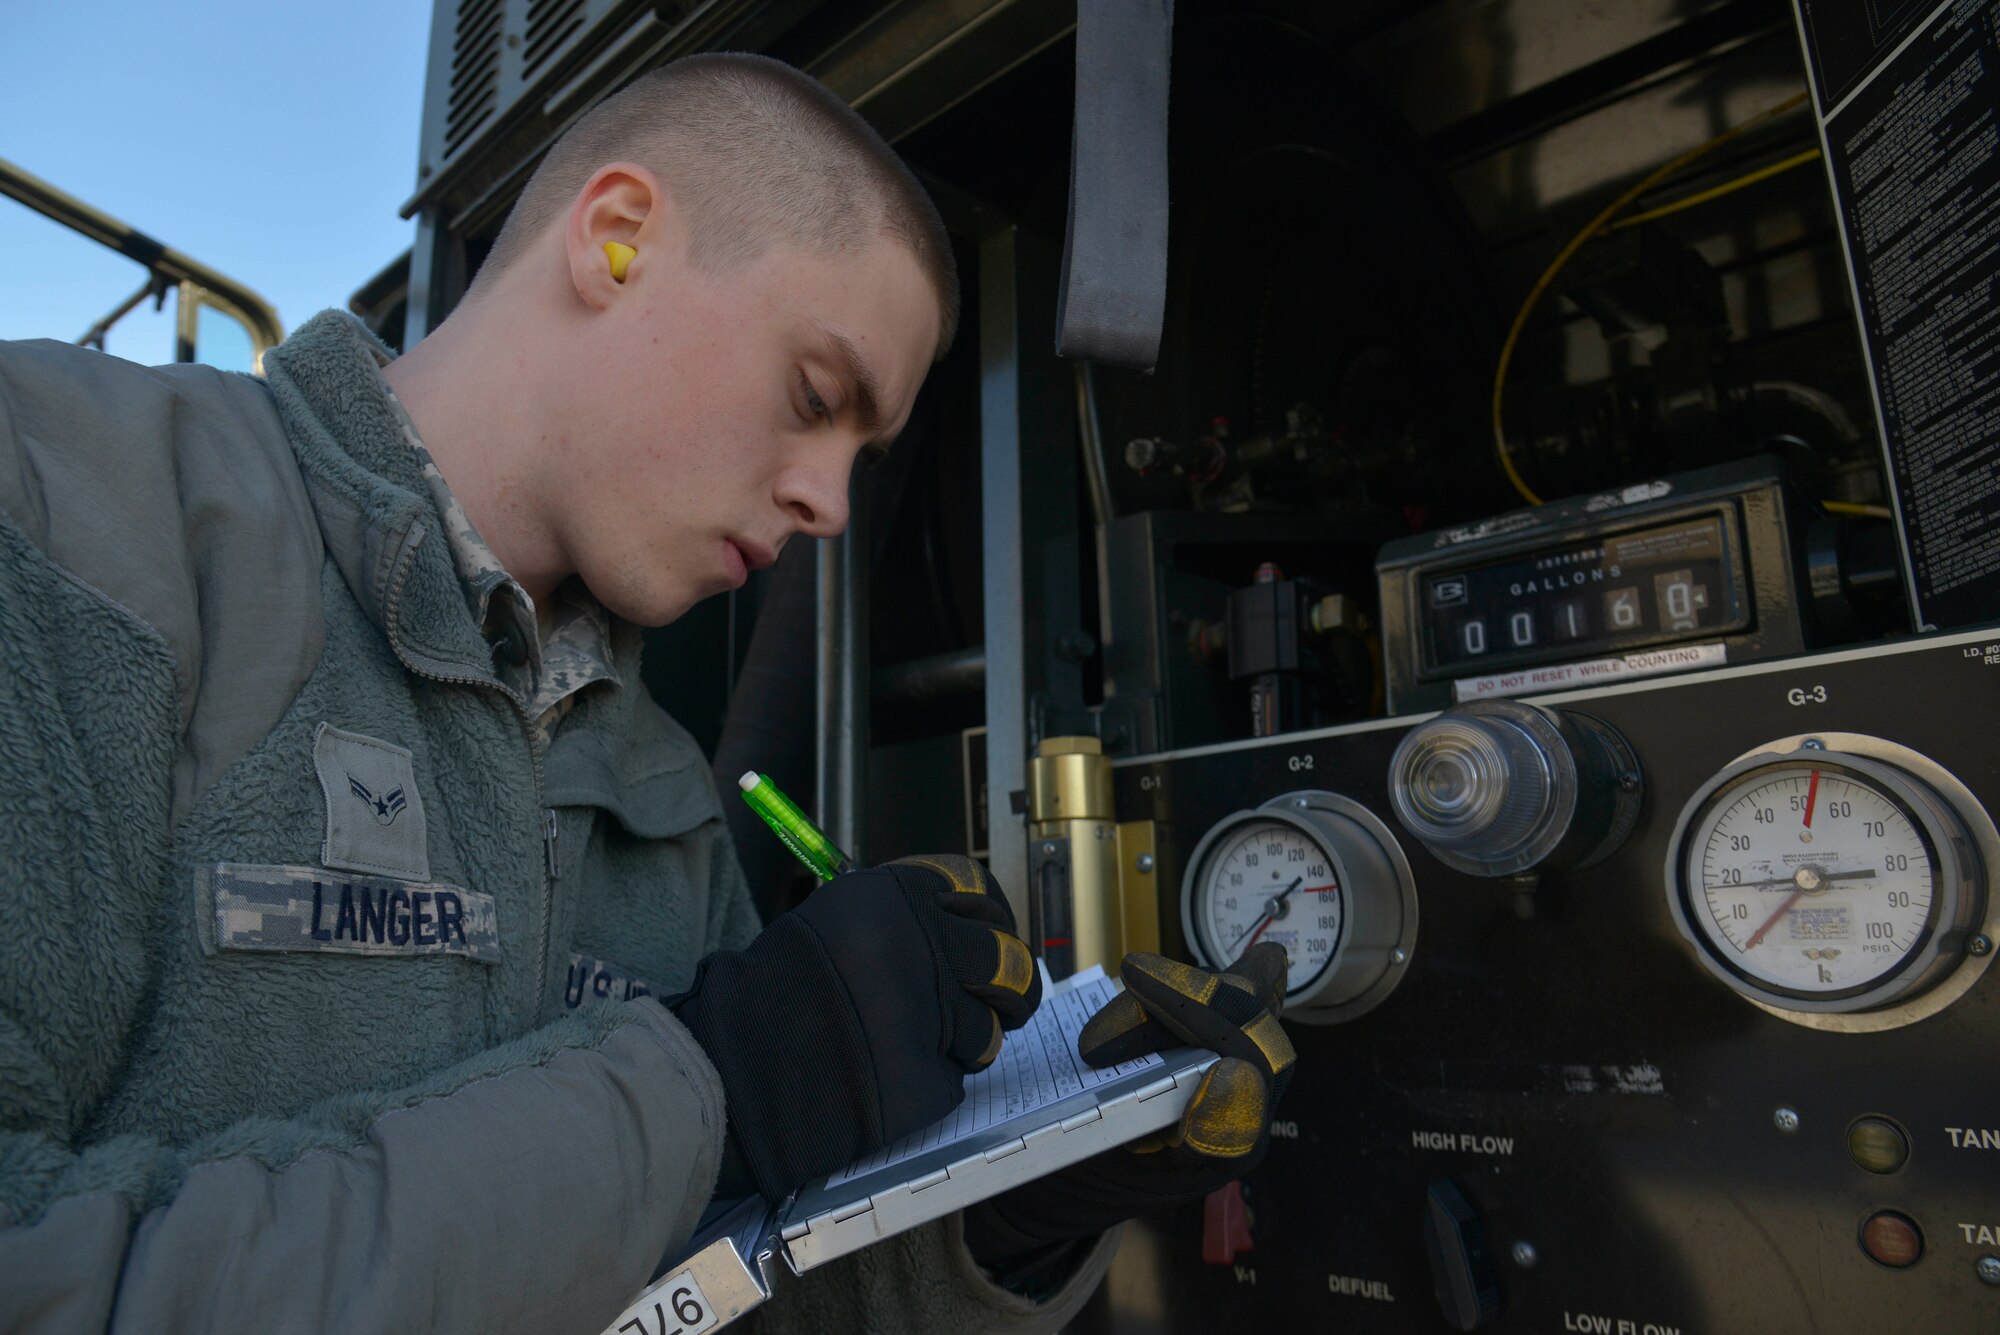 Airman 1st Class Daniel Langer, a 92nd Logistics Readiness Squadron fuels distribution operator, documents the fuel being pumped from an R-11 Fuel Truck to an aircraft Feb. 23, 2015, at Fairchild Air Force Base, Wash. The R-11 trucks hold a maximum of 6,000 gallons of fuel and are capable of dispensing the fuel at a rate of 600 gallons per minute. (U.S. Air Force photo/Senior Airman Janelle Patiño)